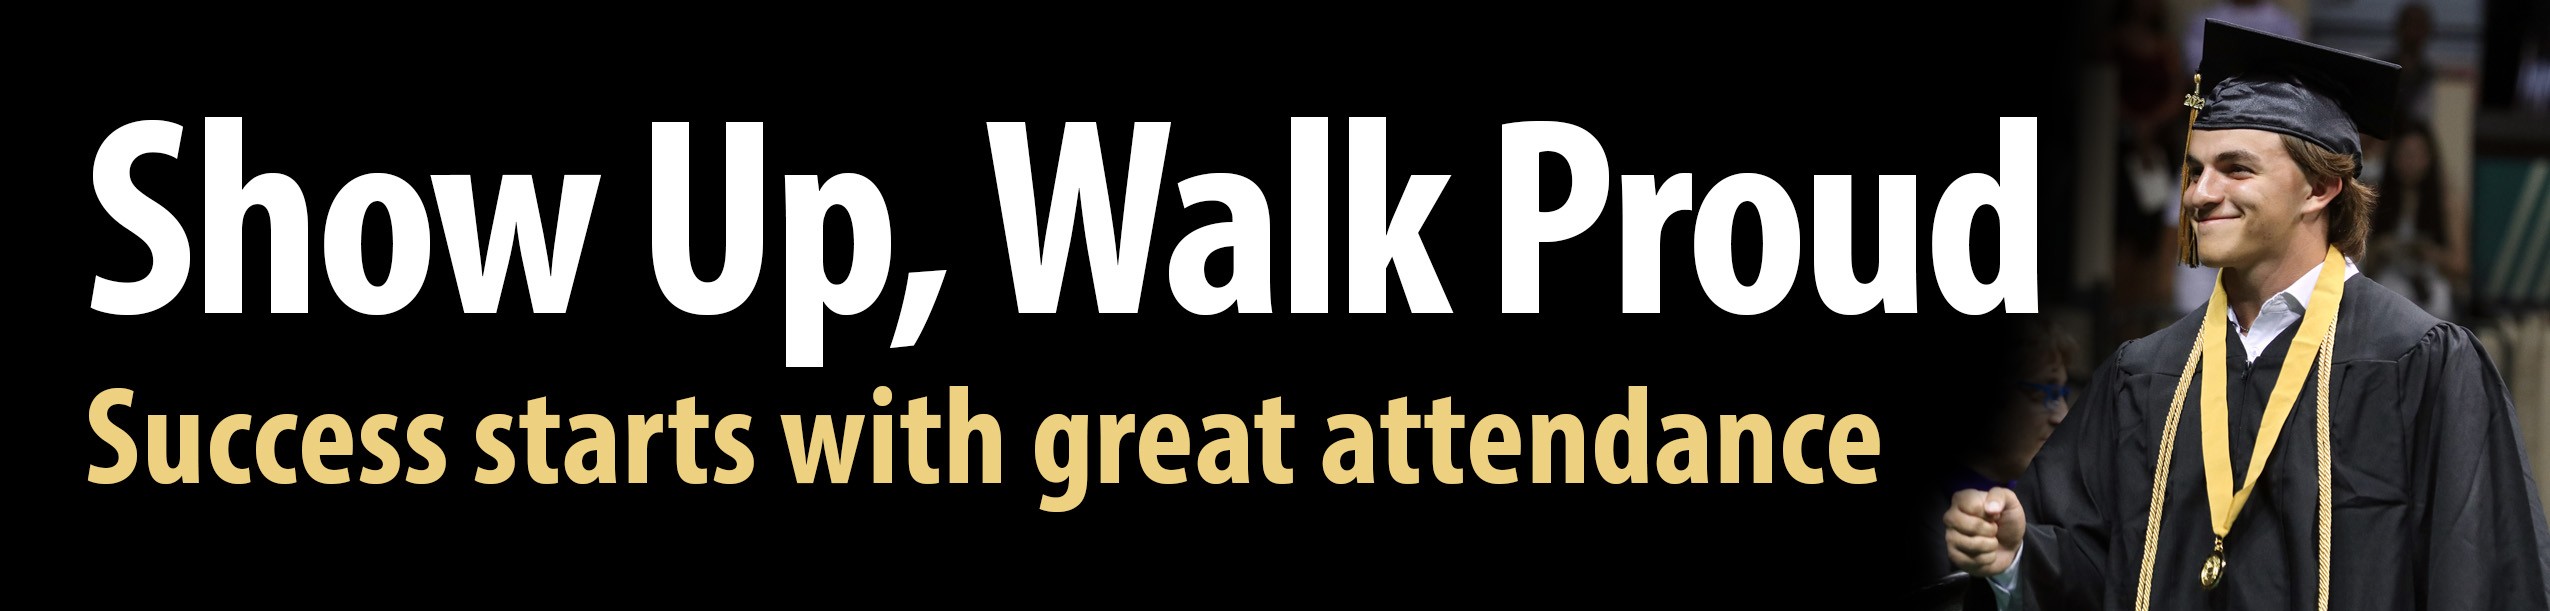 Show up, walk proud - success starts with great attendance